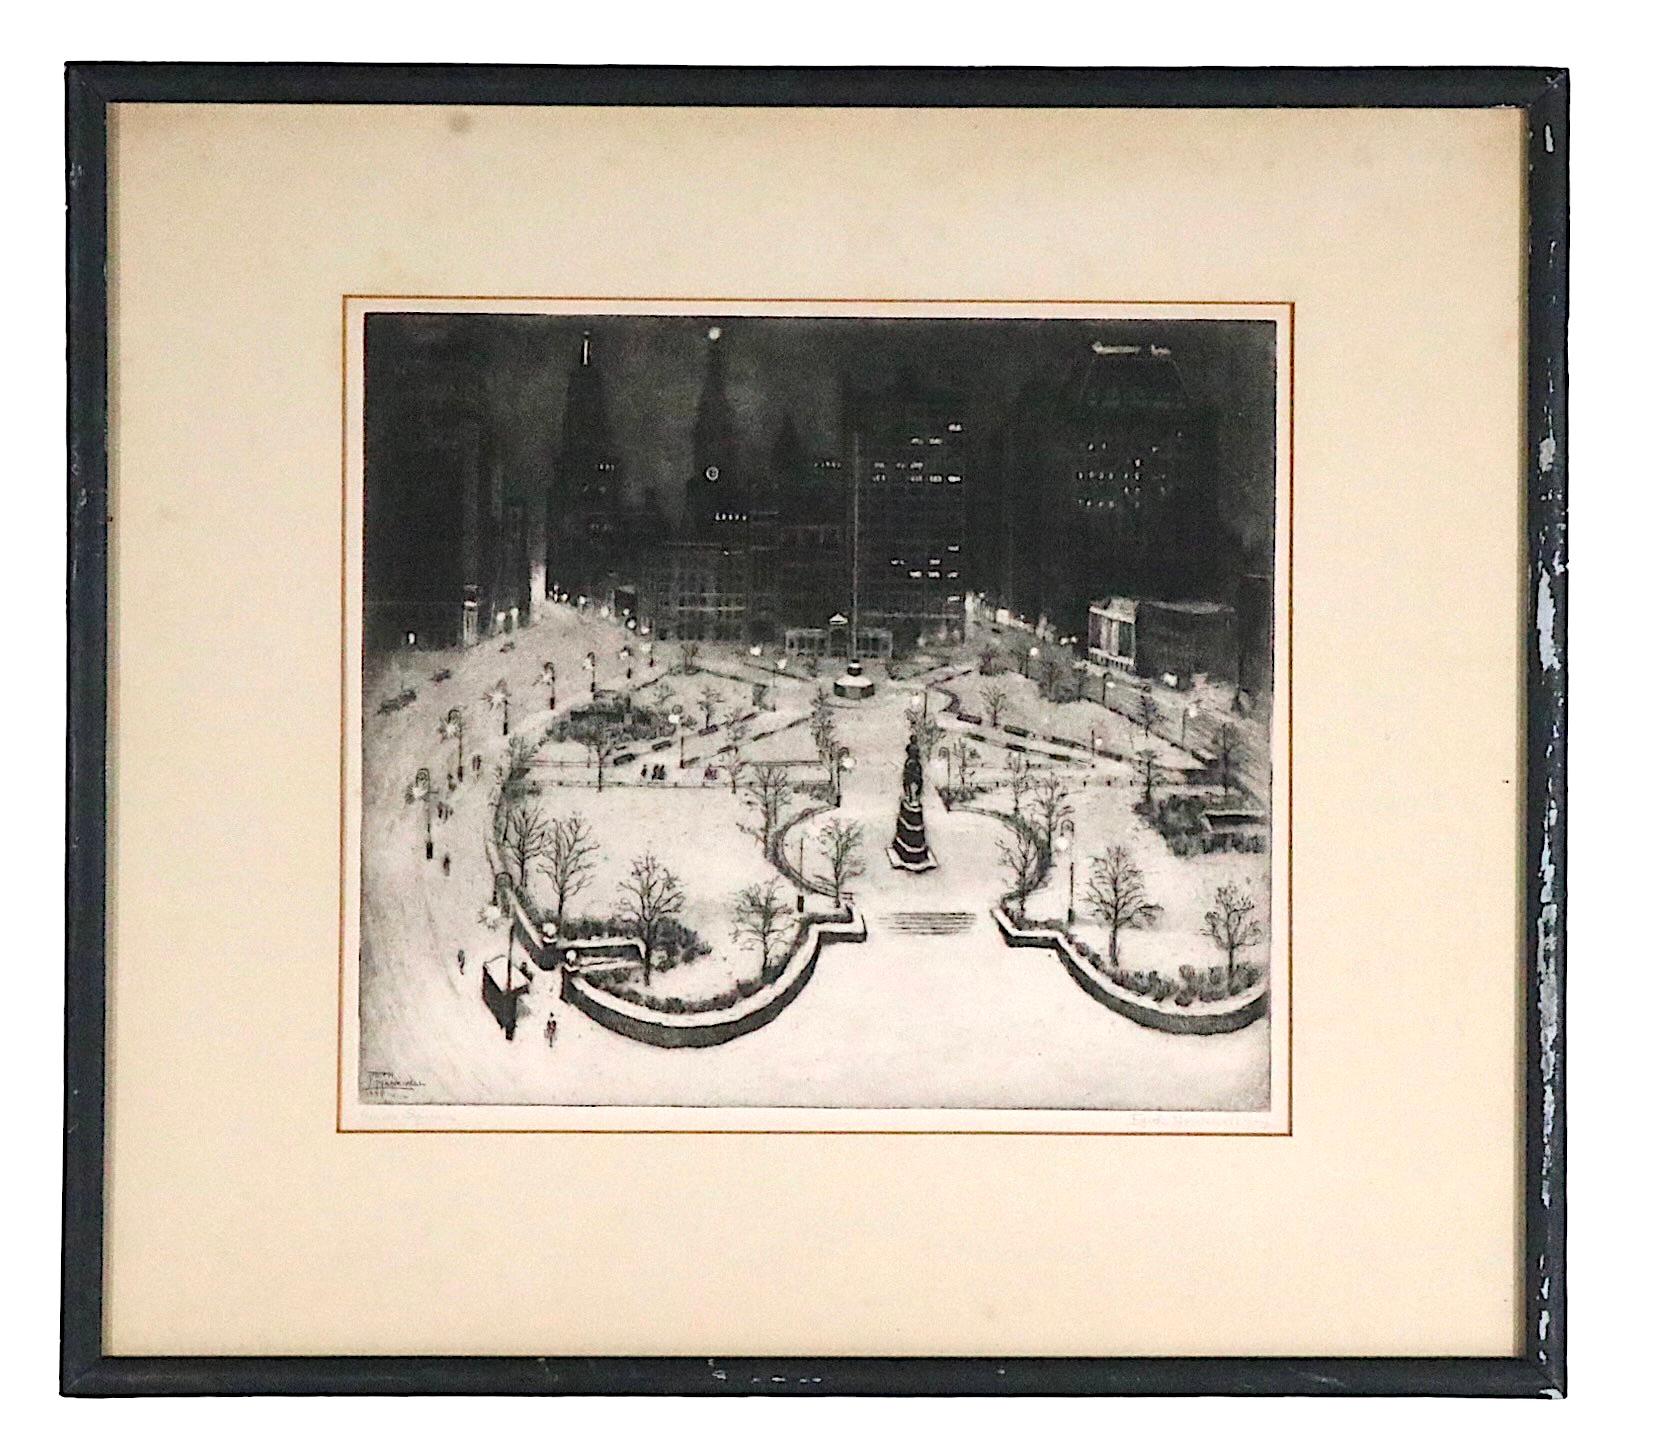 Art Deco NYC Scene Aquatint Etching by Edith Nankivell Pencil Signed Limited Edition 